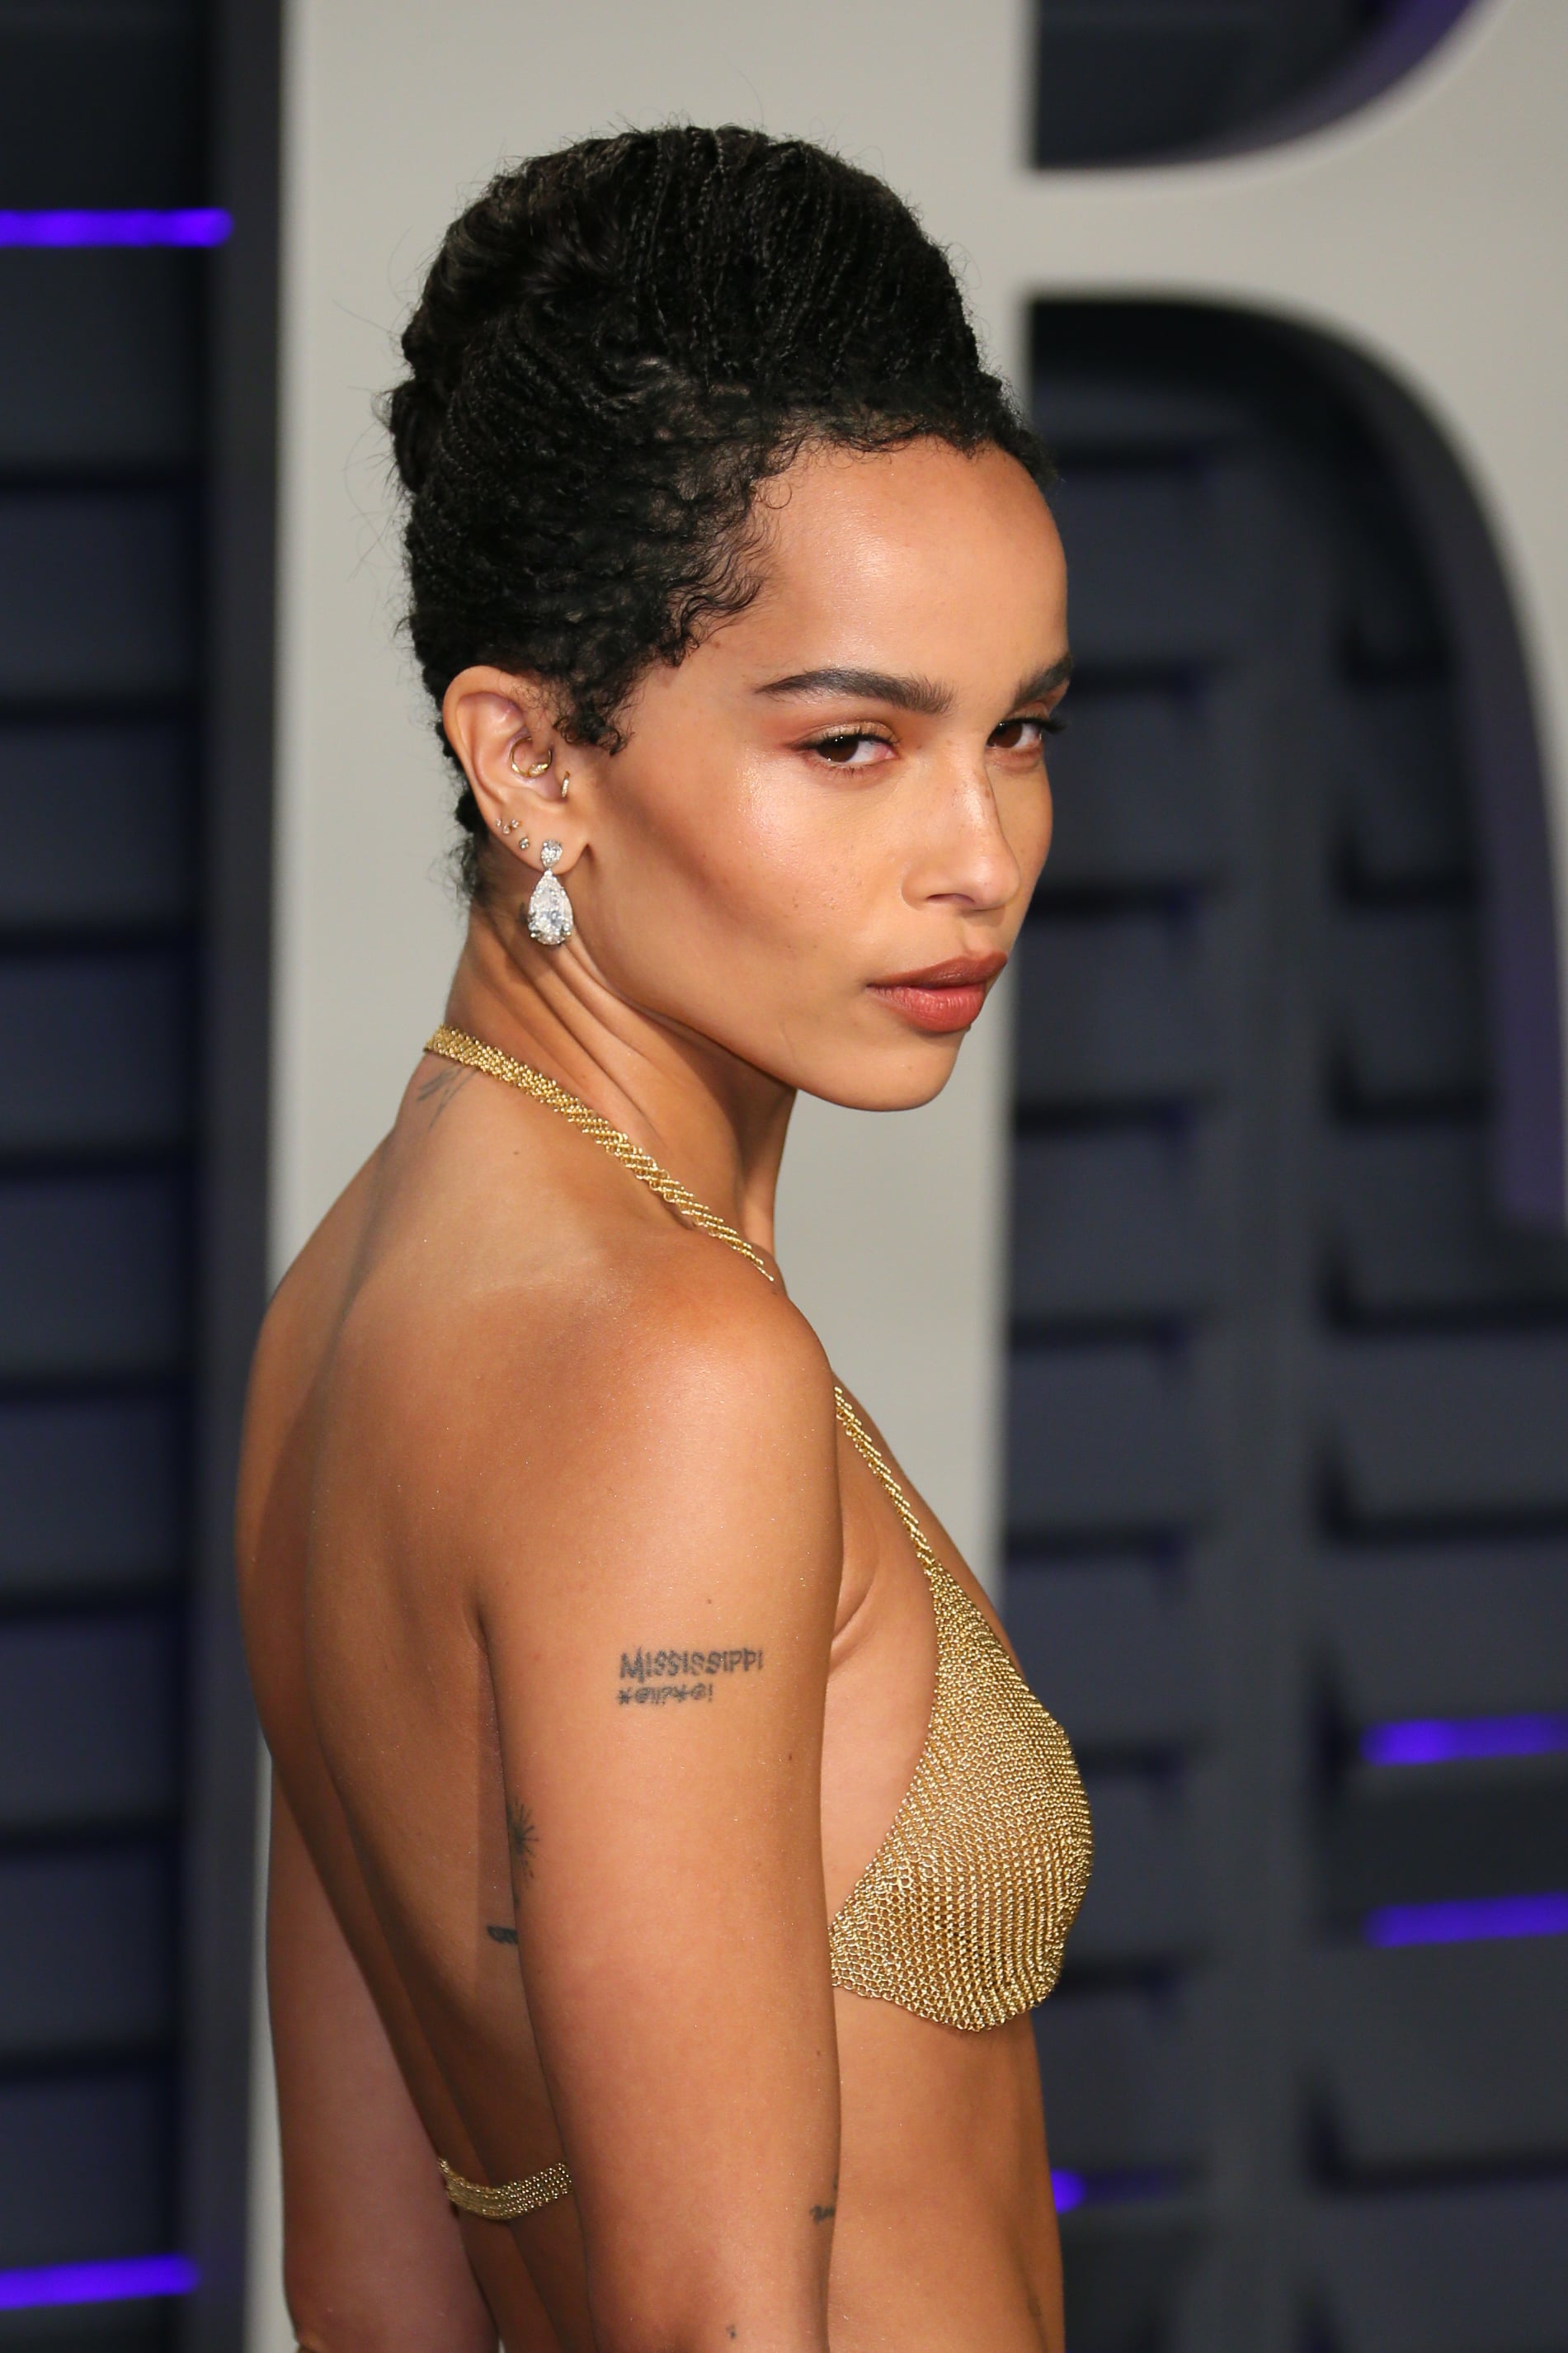 Zoe Kravitz Wore an 18 Karat Gold Bra Top to the Oscars After Party